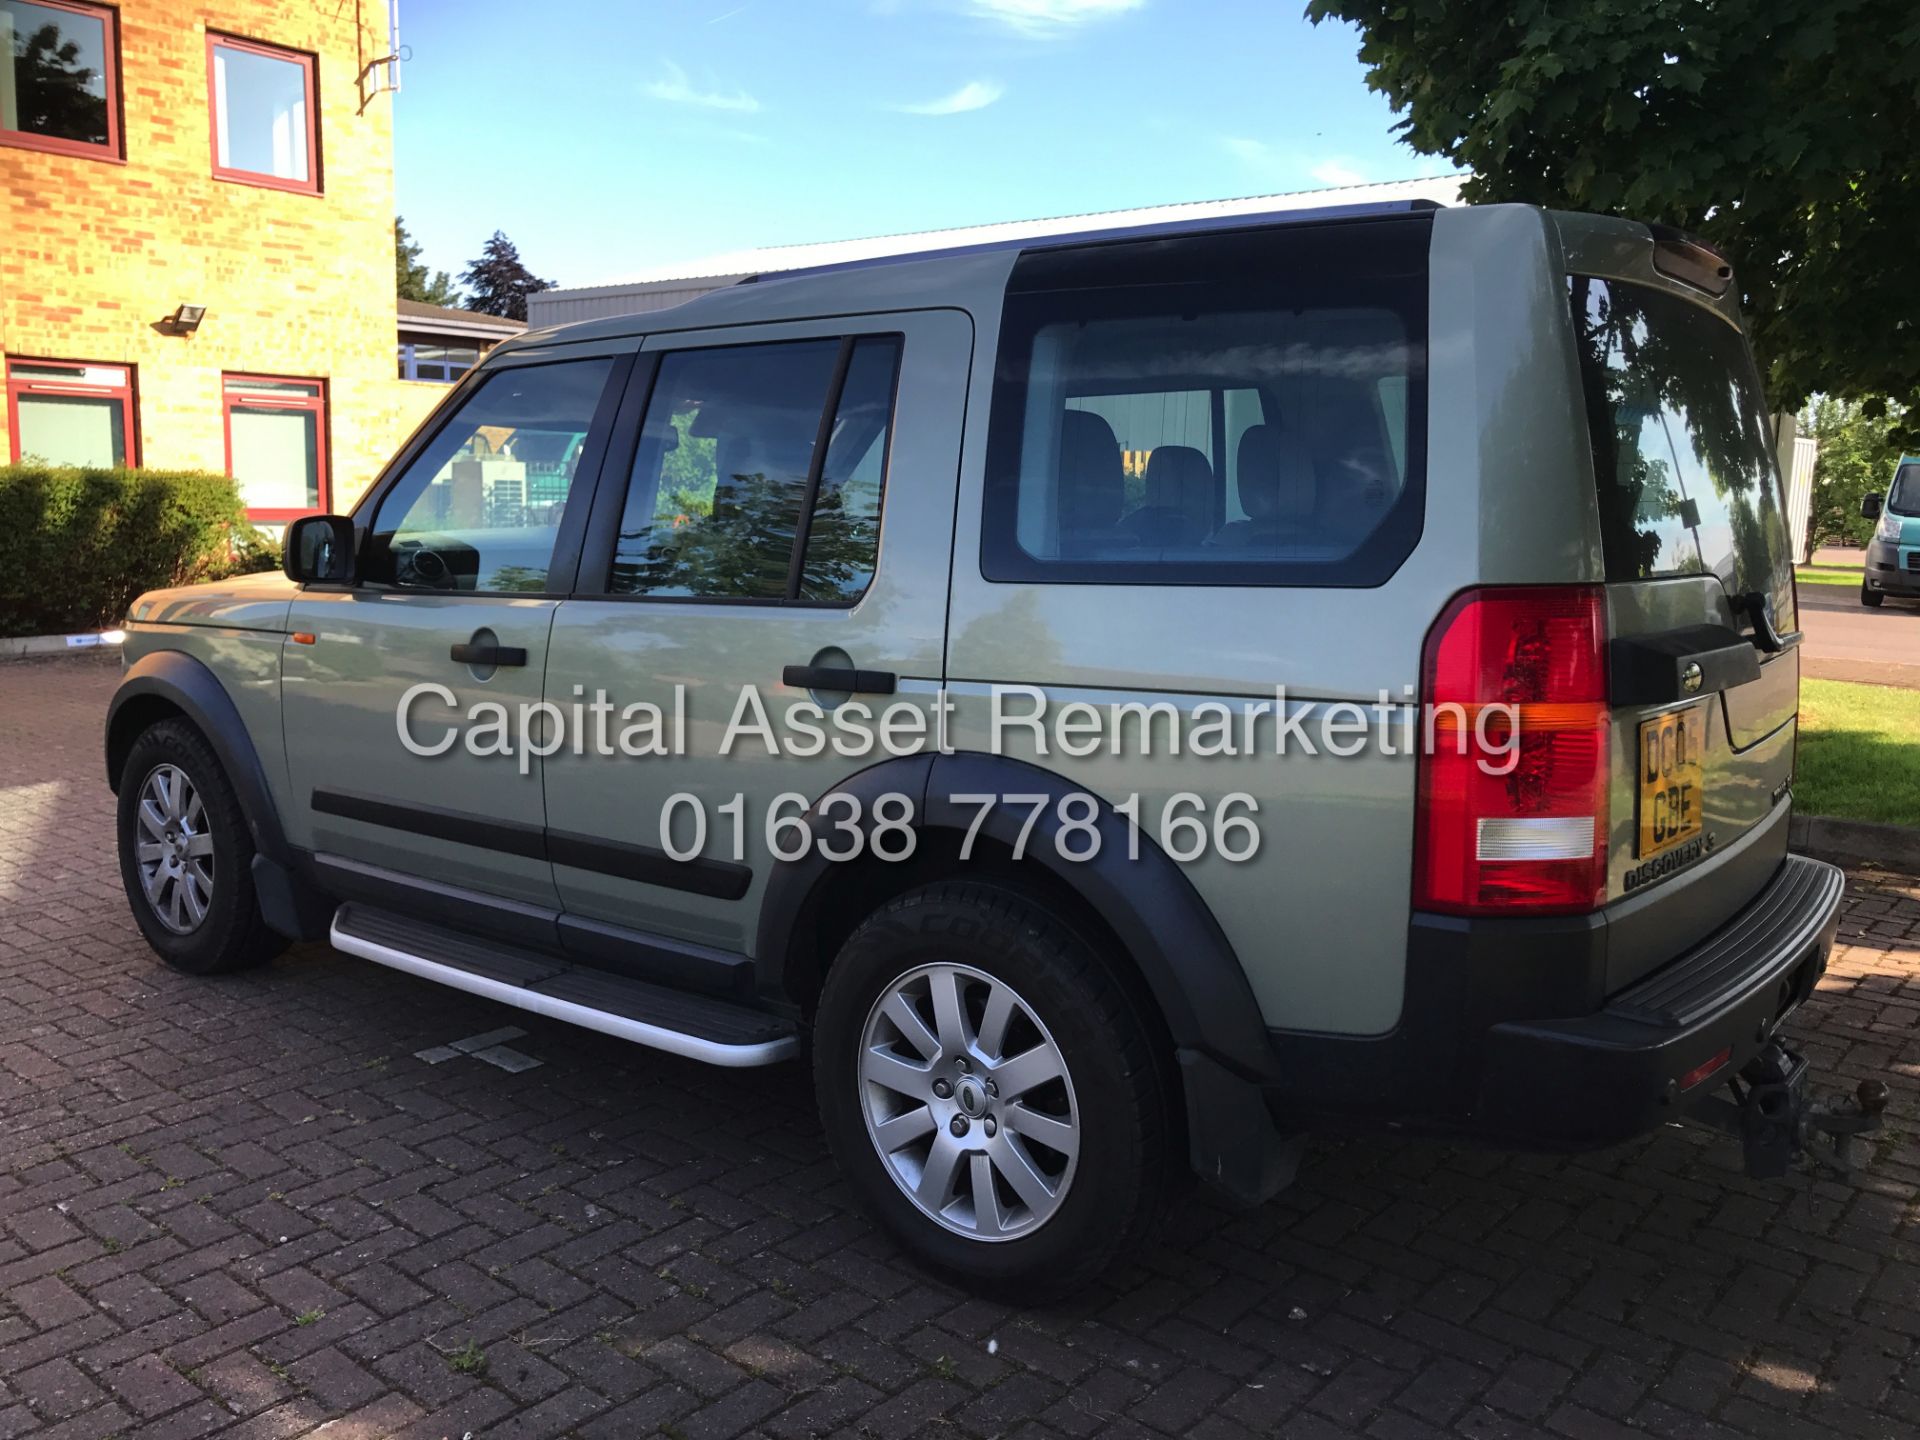 (ON SALE) LAND ROVER DISCOVERY TDV6 "SE 7 SEATER" GREAT SPEC - SAT NAV - FULL LEATHER - NO VAT - Image 7 of 28